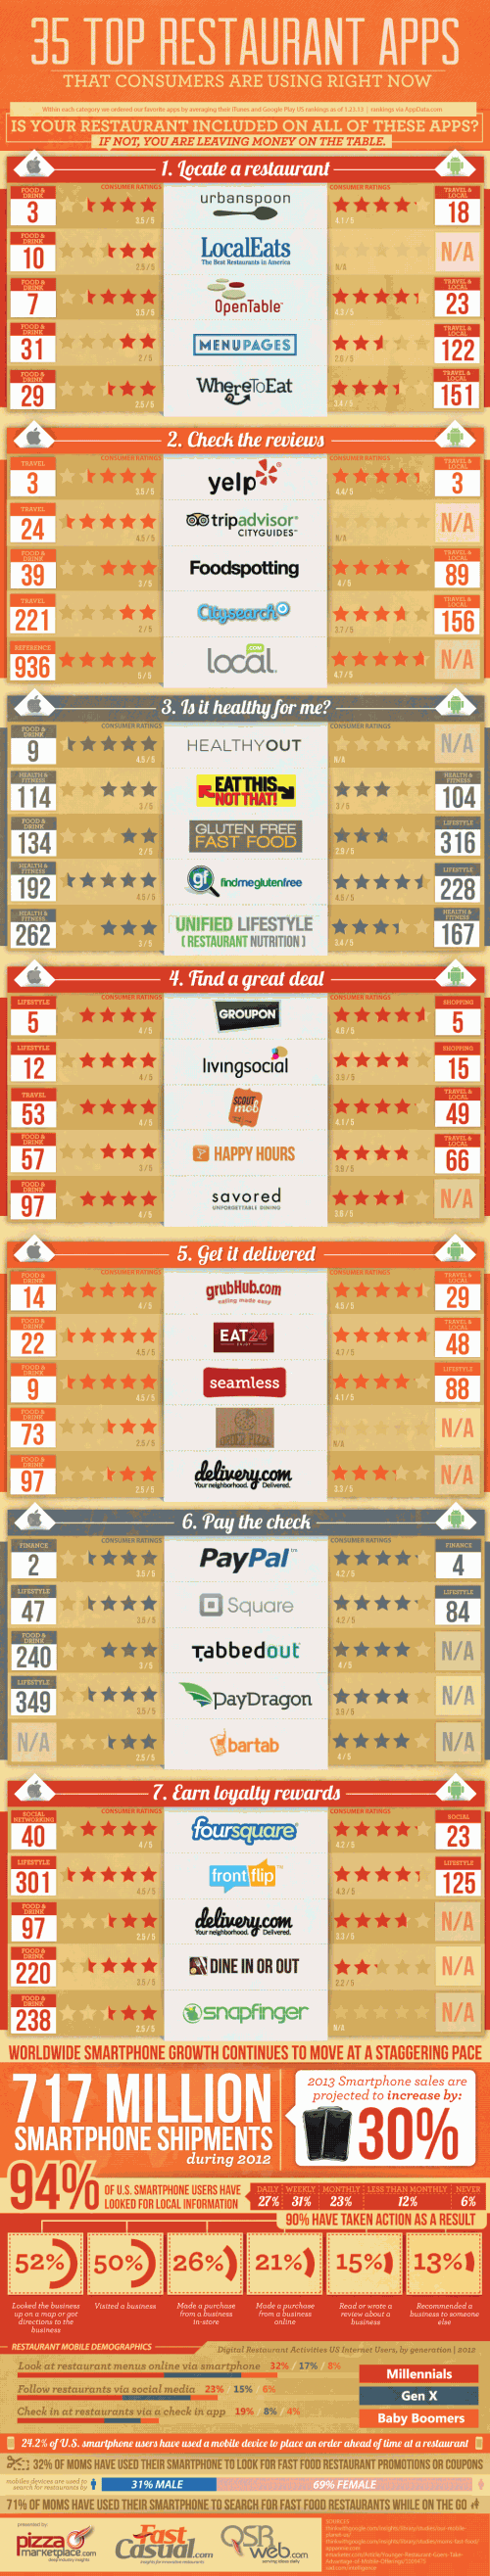 The 35 Most Popular Mobile Restaurant Apps (Infographic)